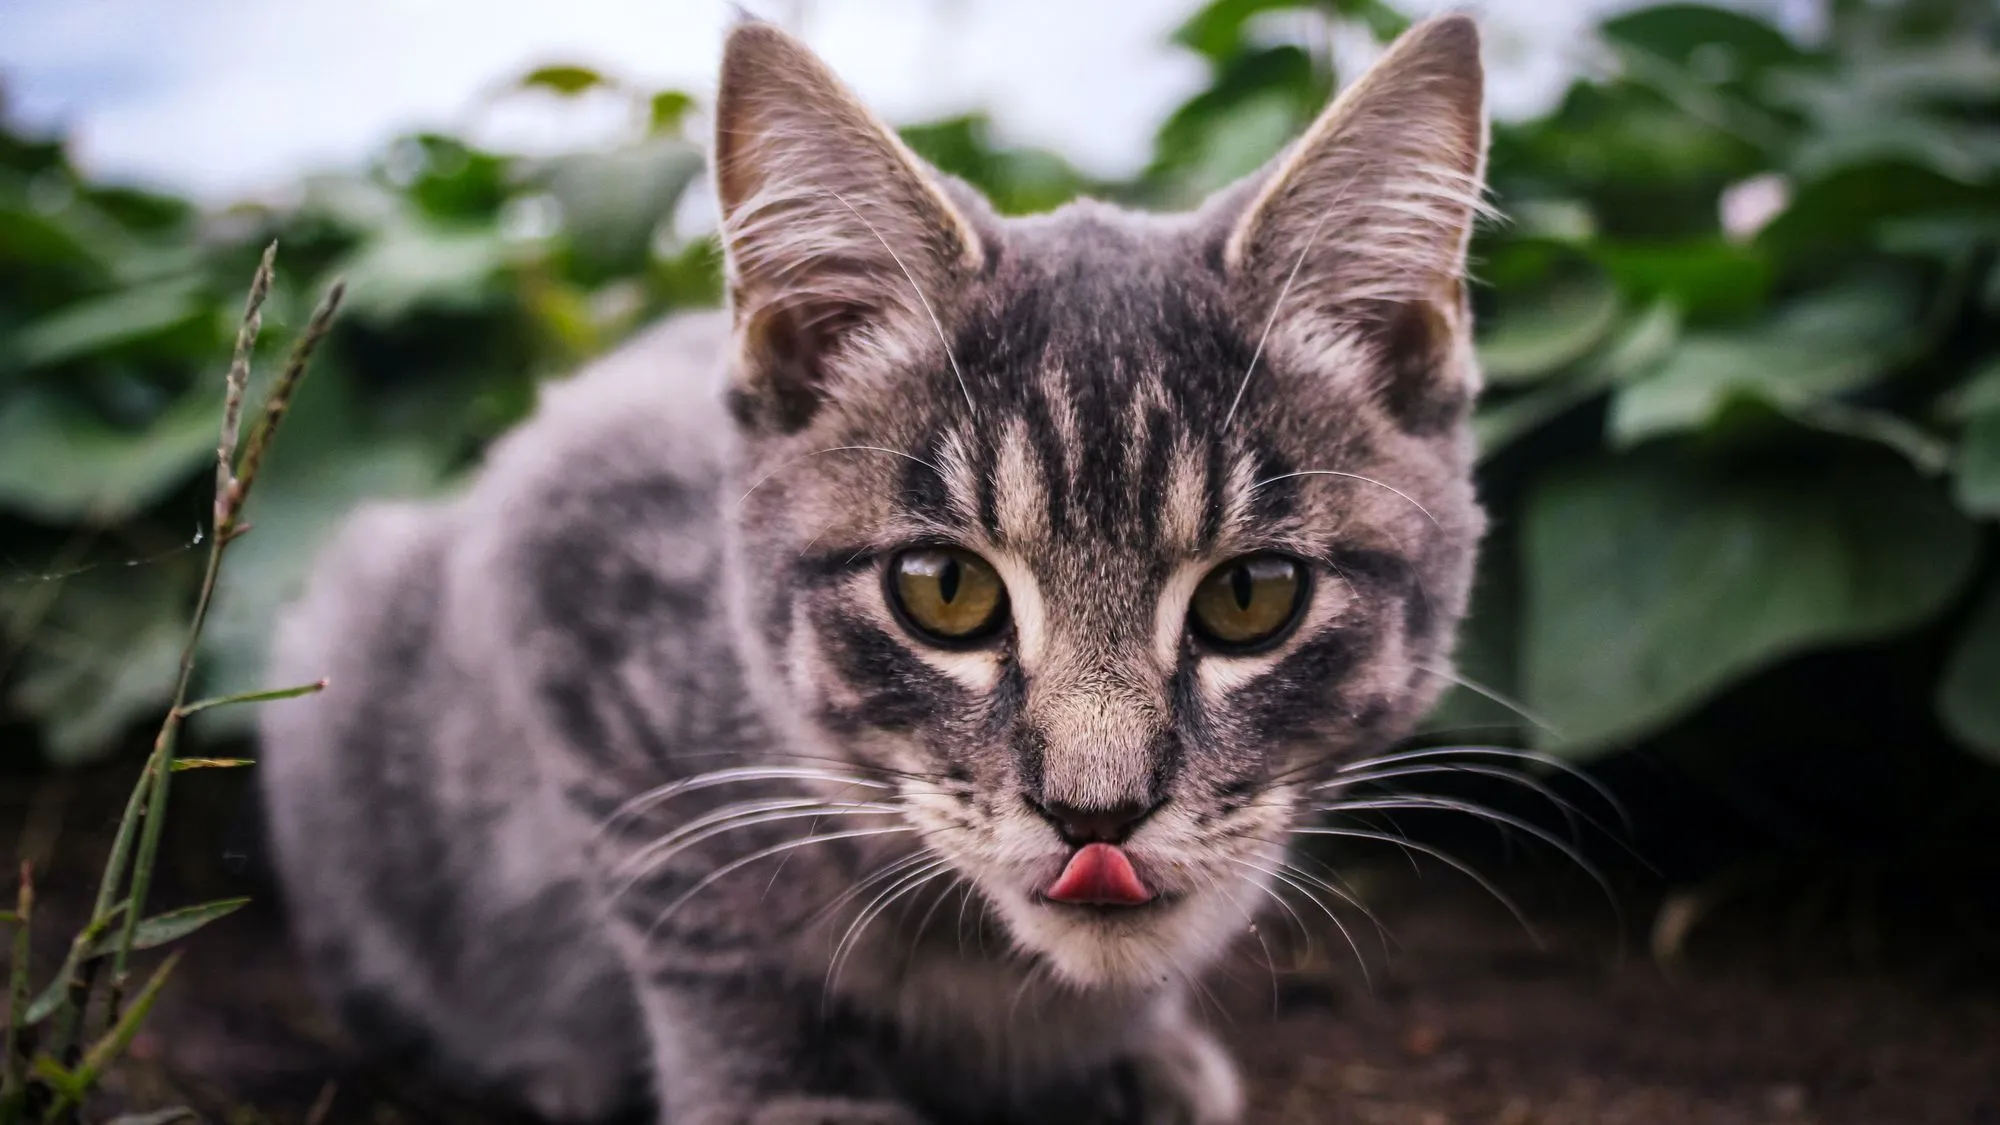 Cats are always interested in new things, but that does not mean they will enjoy everything they see! For instance, learn more on why do cats hate cucumbers.